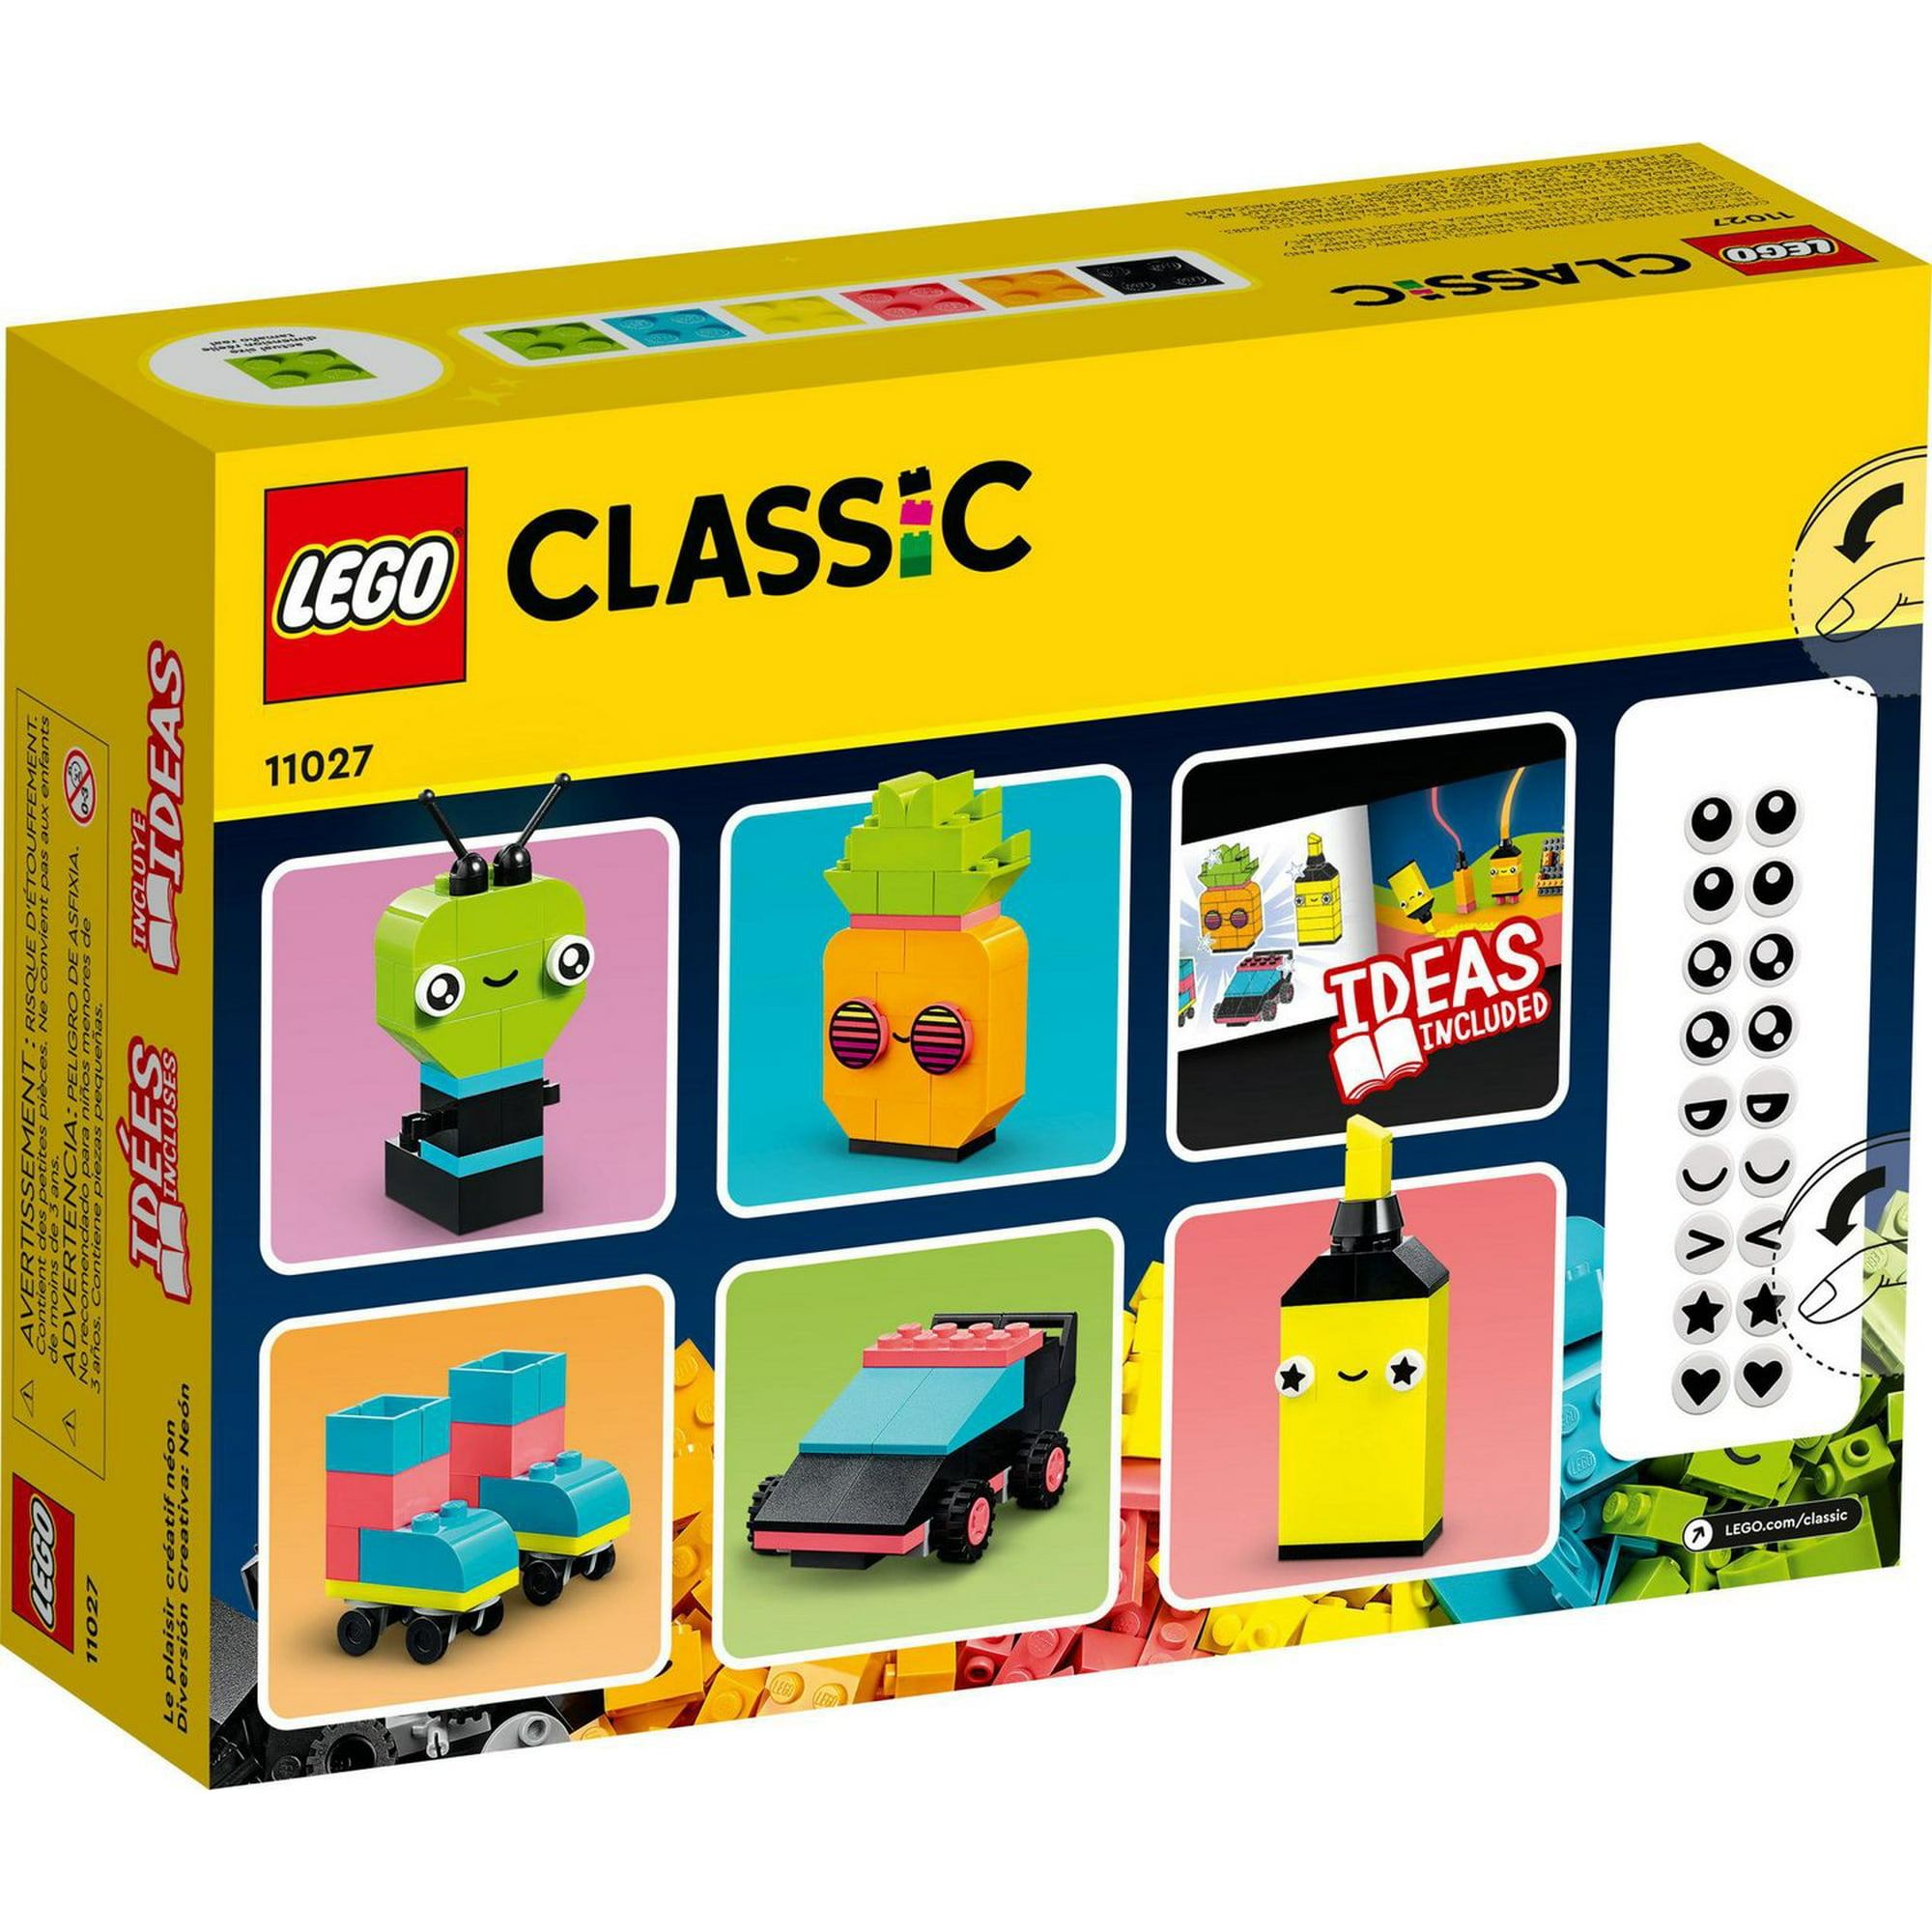 LEGO Classic Creative Neon Colors Fun Brick Box Set 11027, Building Toy to  Create a Car, Pineapple, Alien, Roller Skates, and More Building Ideas for  Kids, Boys, Girls Ages 5 Plus Years